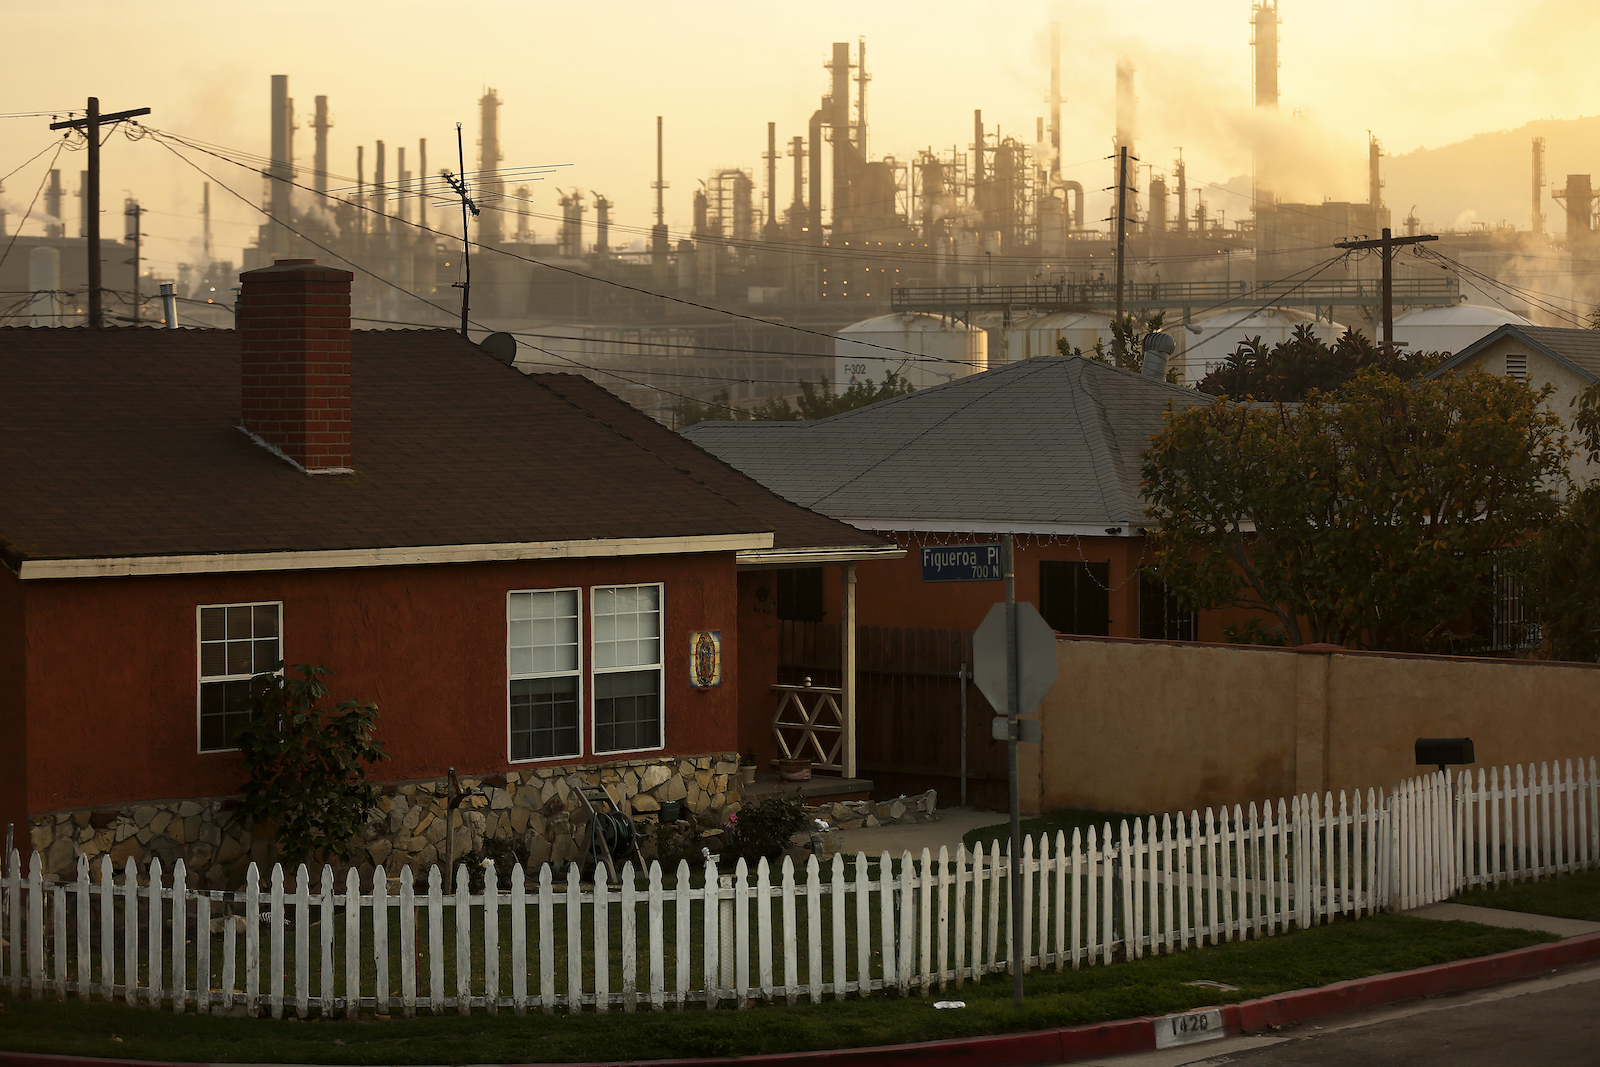 A sprawling refinery in the background of a row of residential homes.